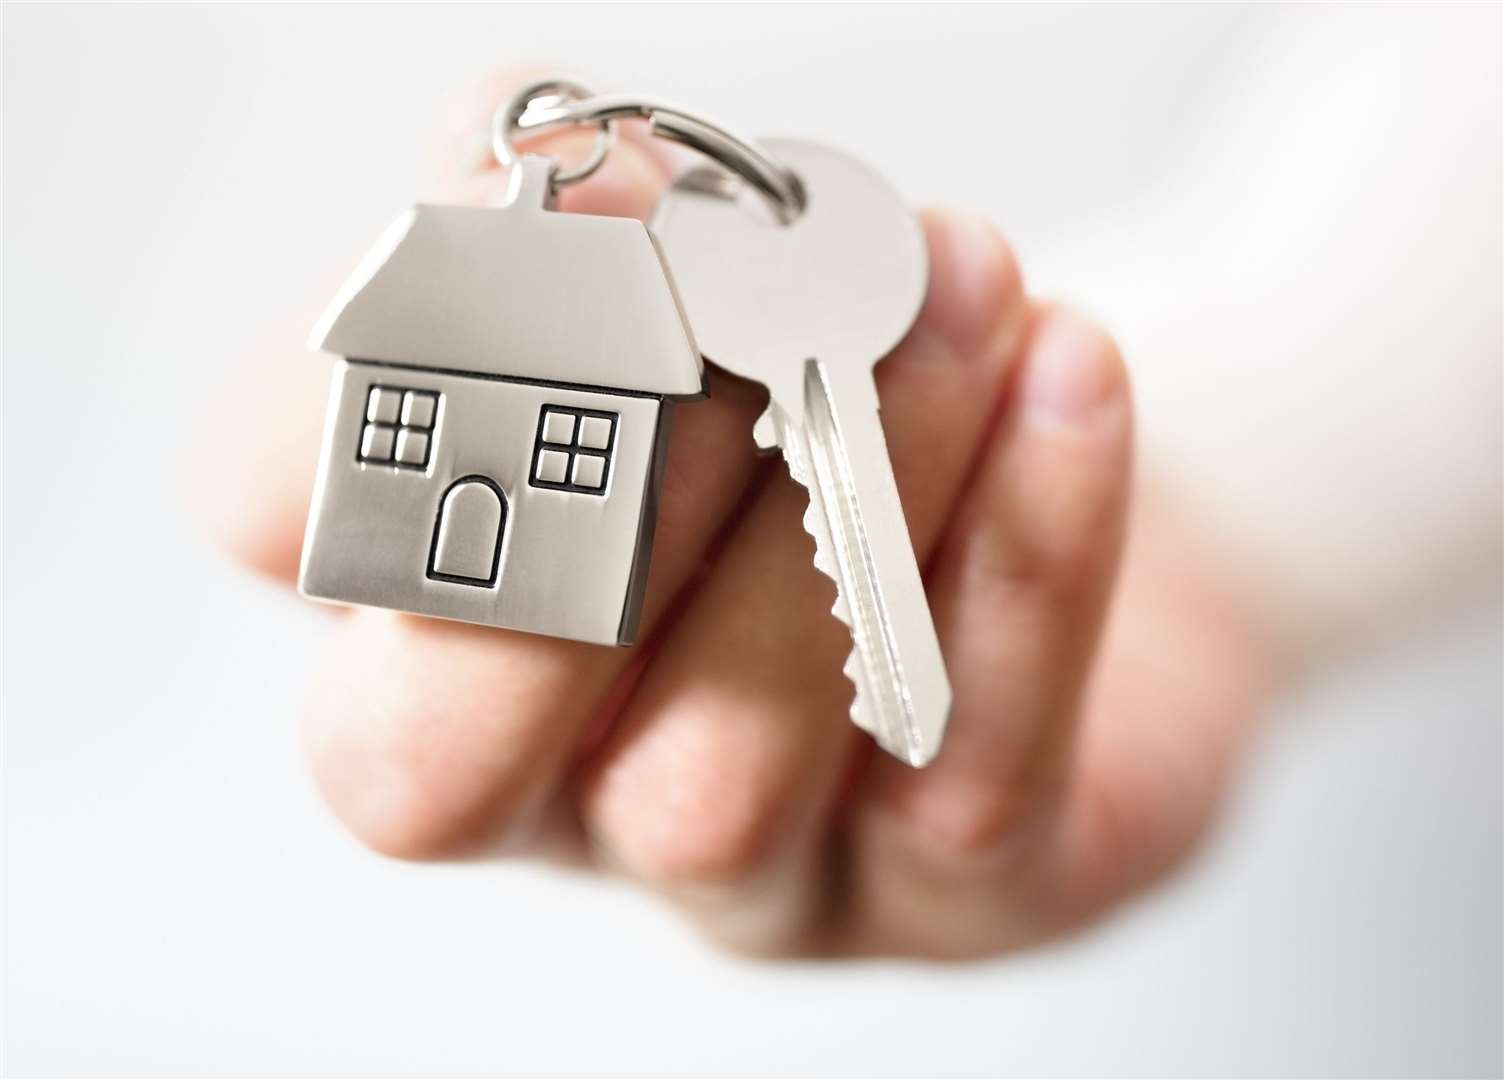 Landlords are urged to attend the event to hear the latest legal requirements they must meet